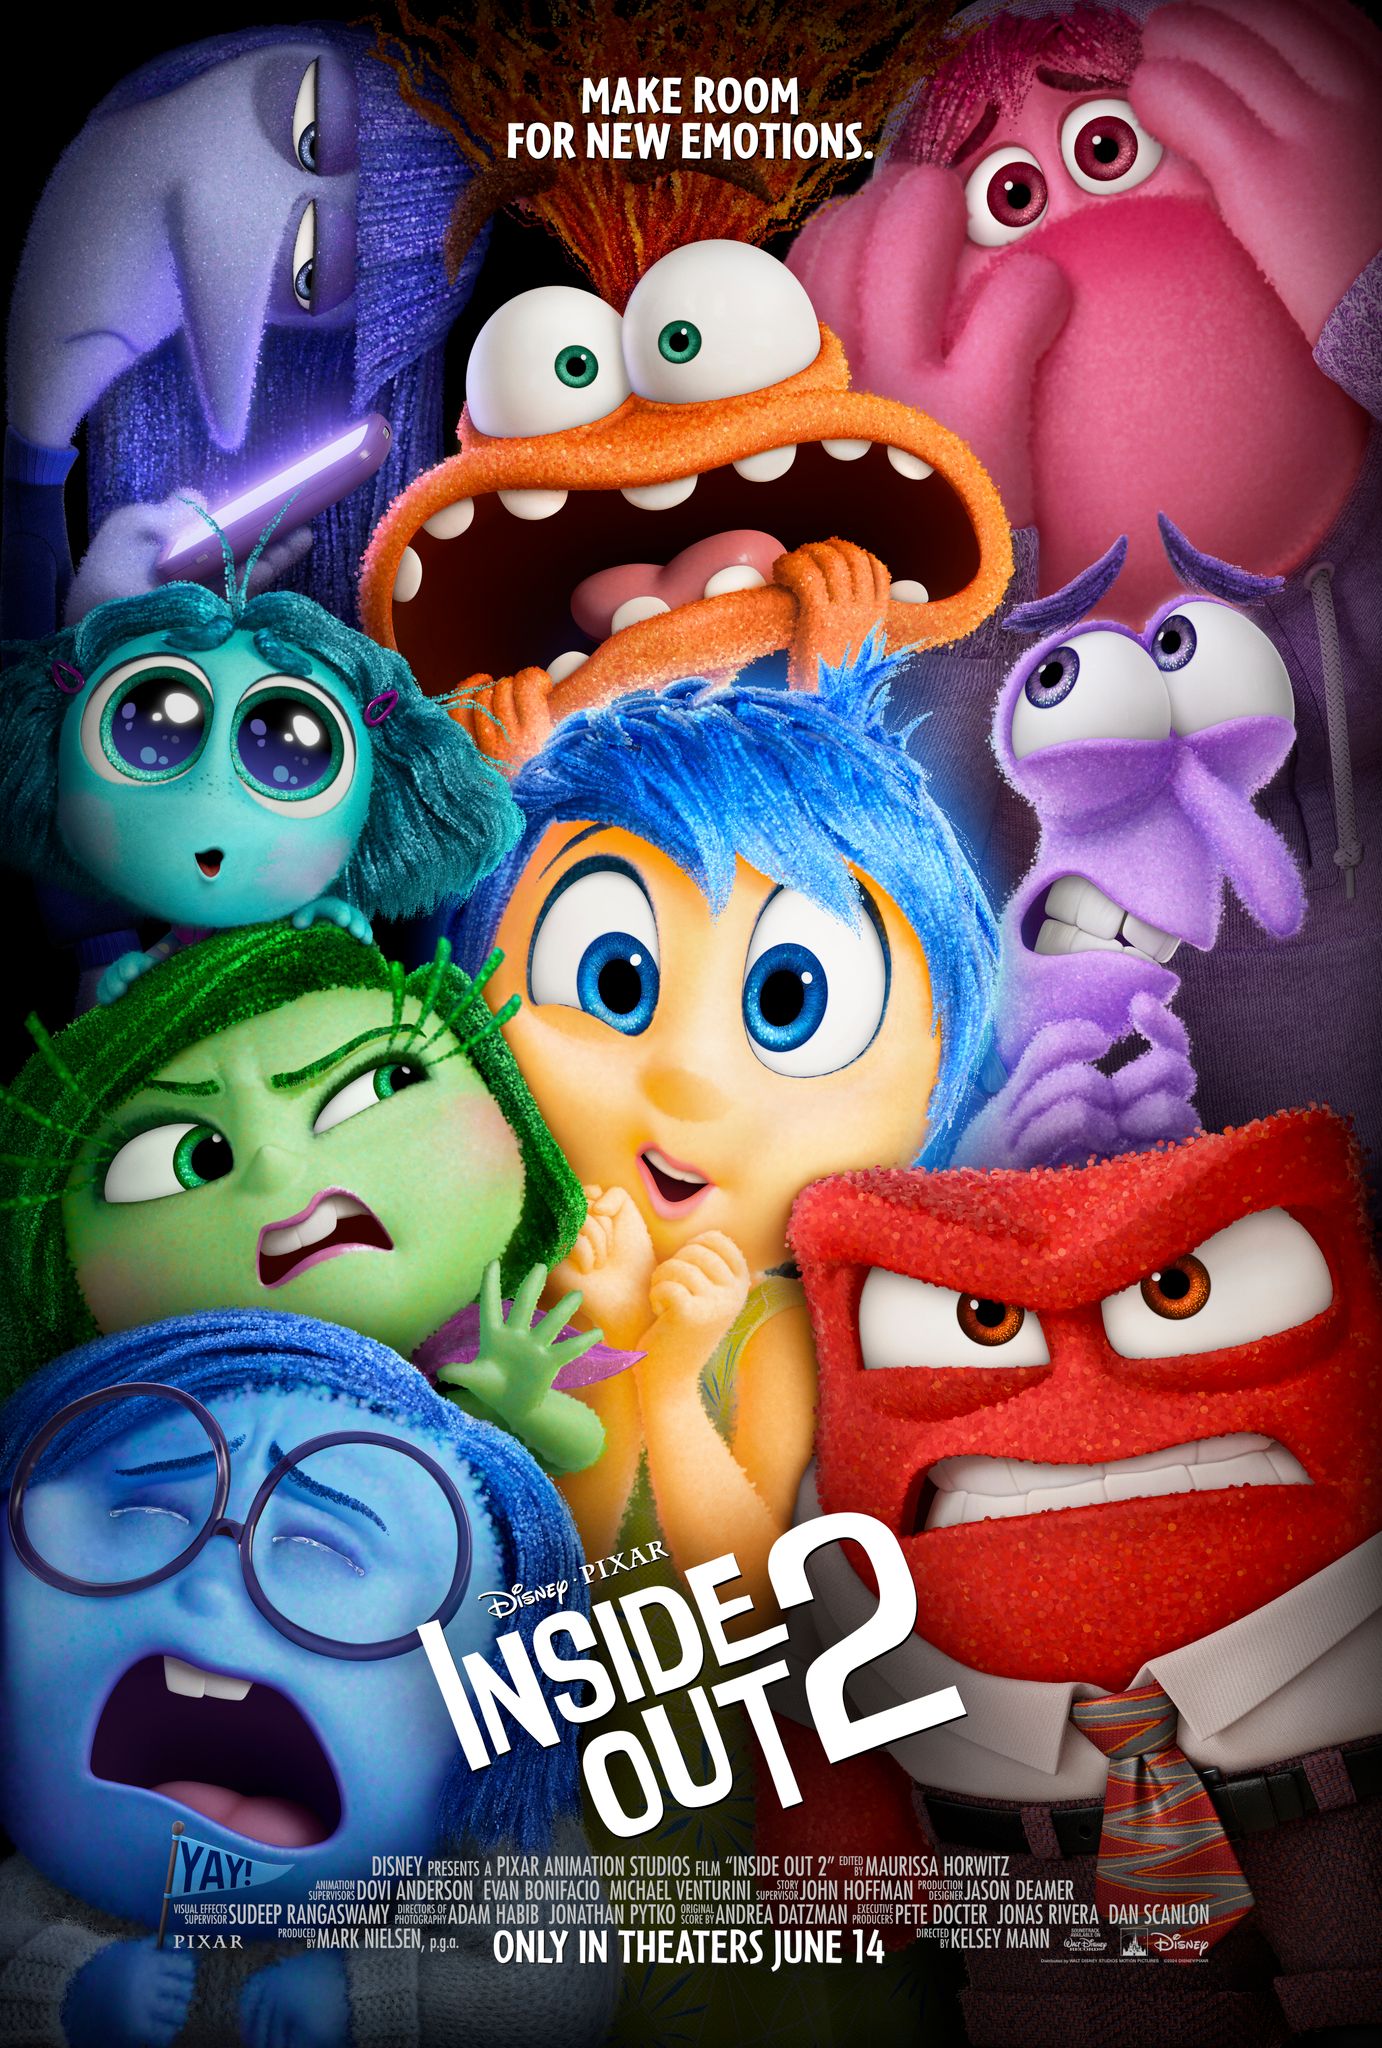 Inside Out 2 poster showing joy and other emotions squashed together